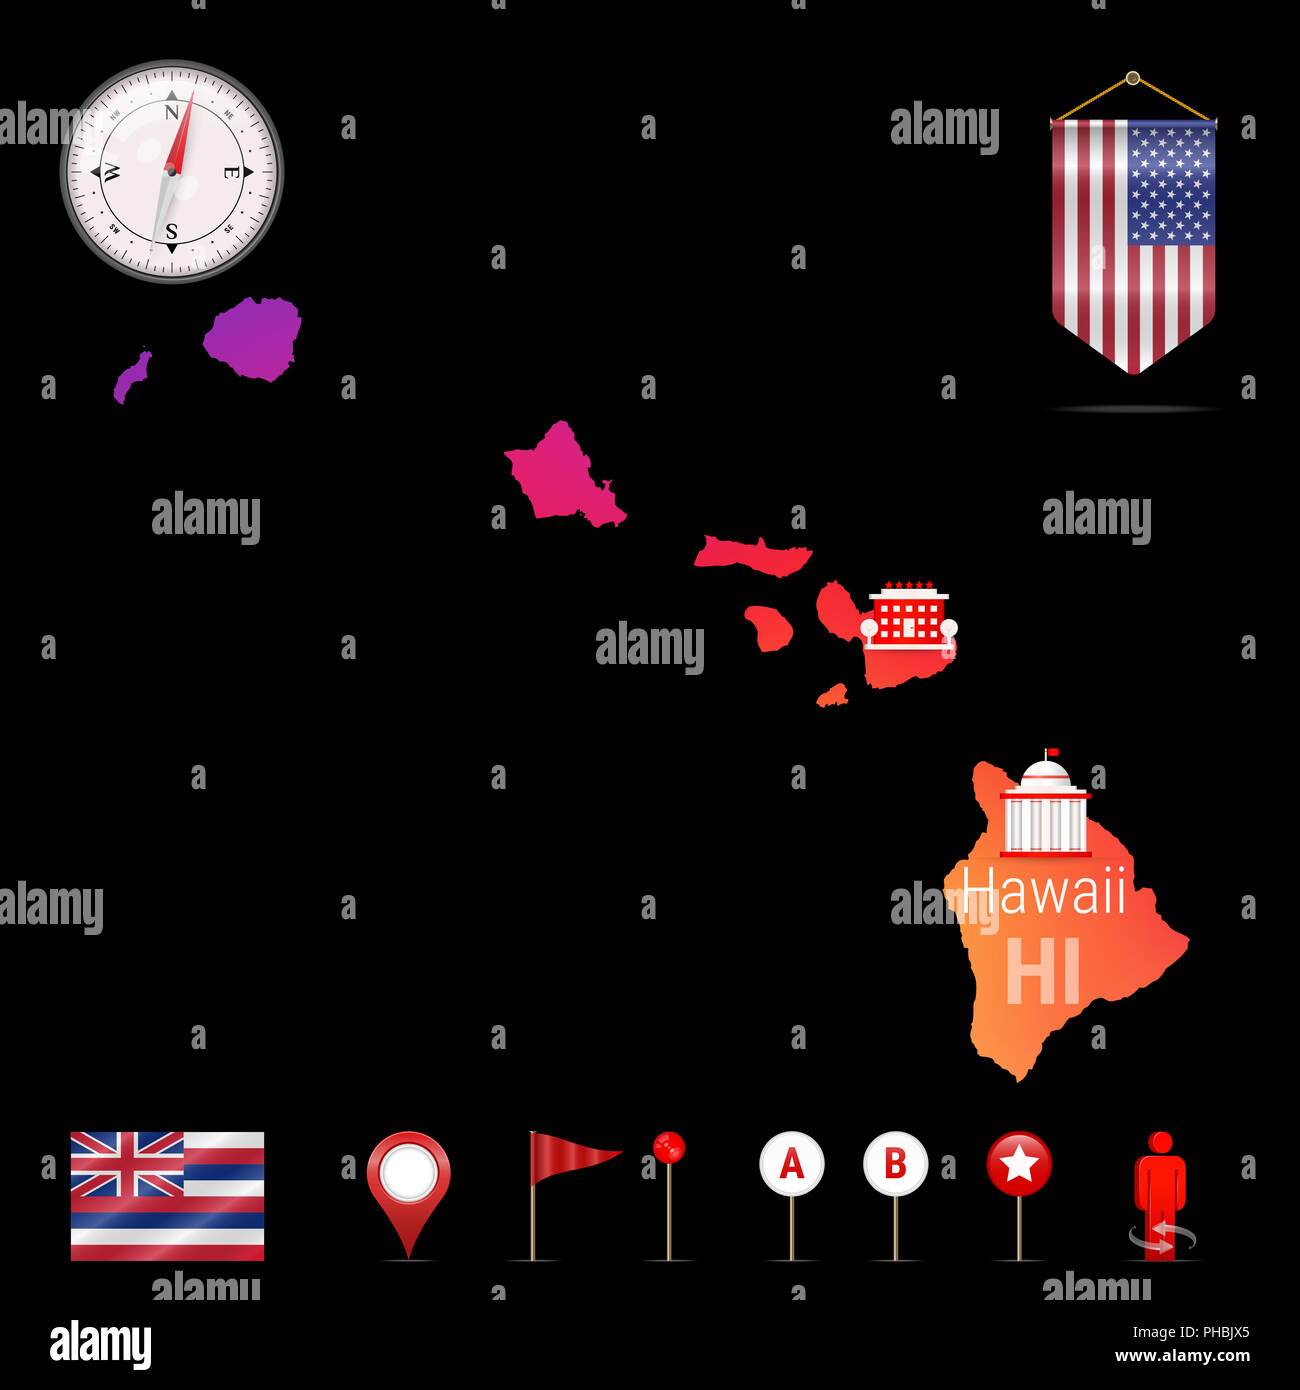 Hawaii Map, Night View. Compass Icon, Map Navigation Elements. Pennant Flag of the United States. Flag of Hawaii. Various Industries, Economic Geograp Stock Photo